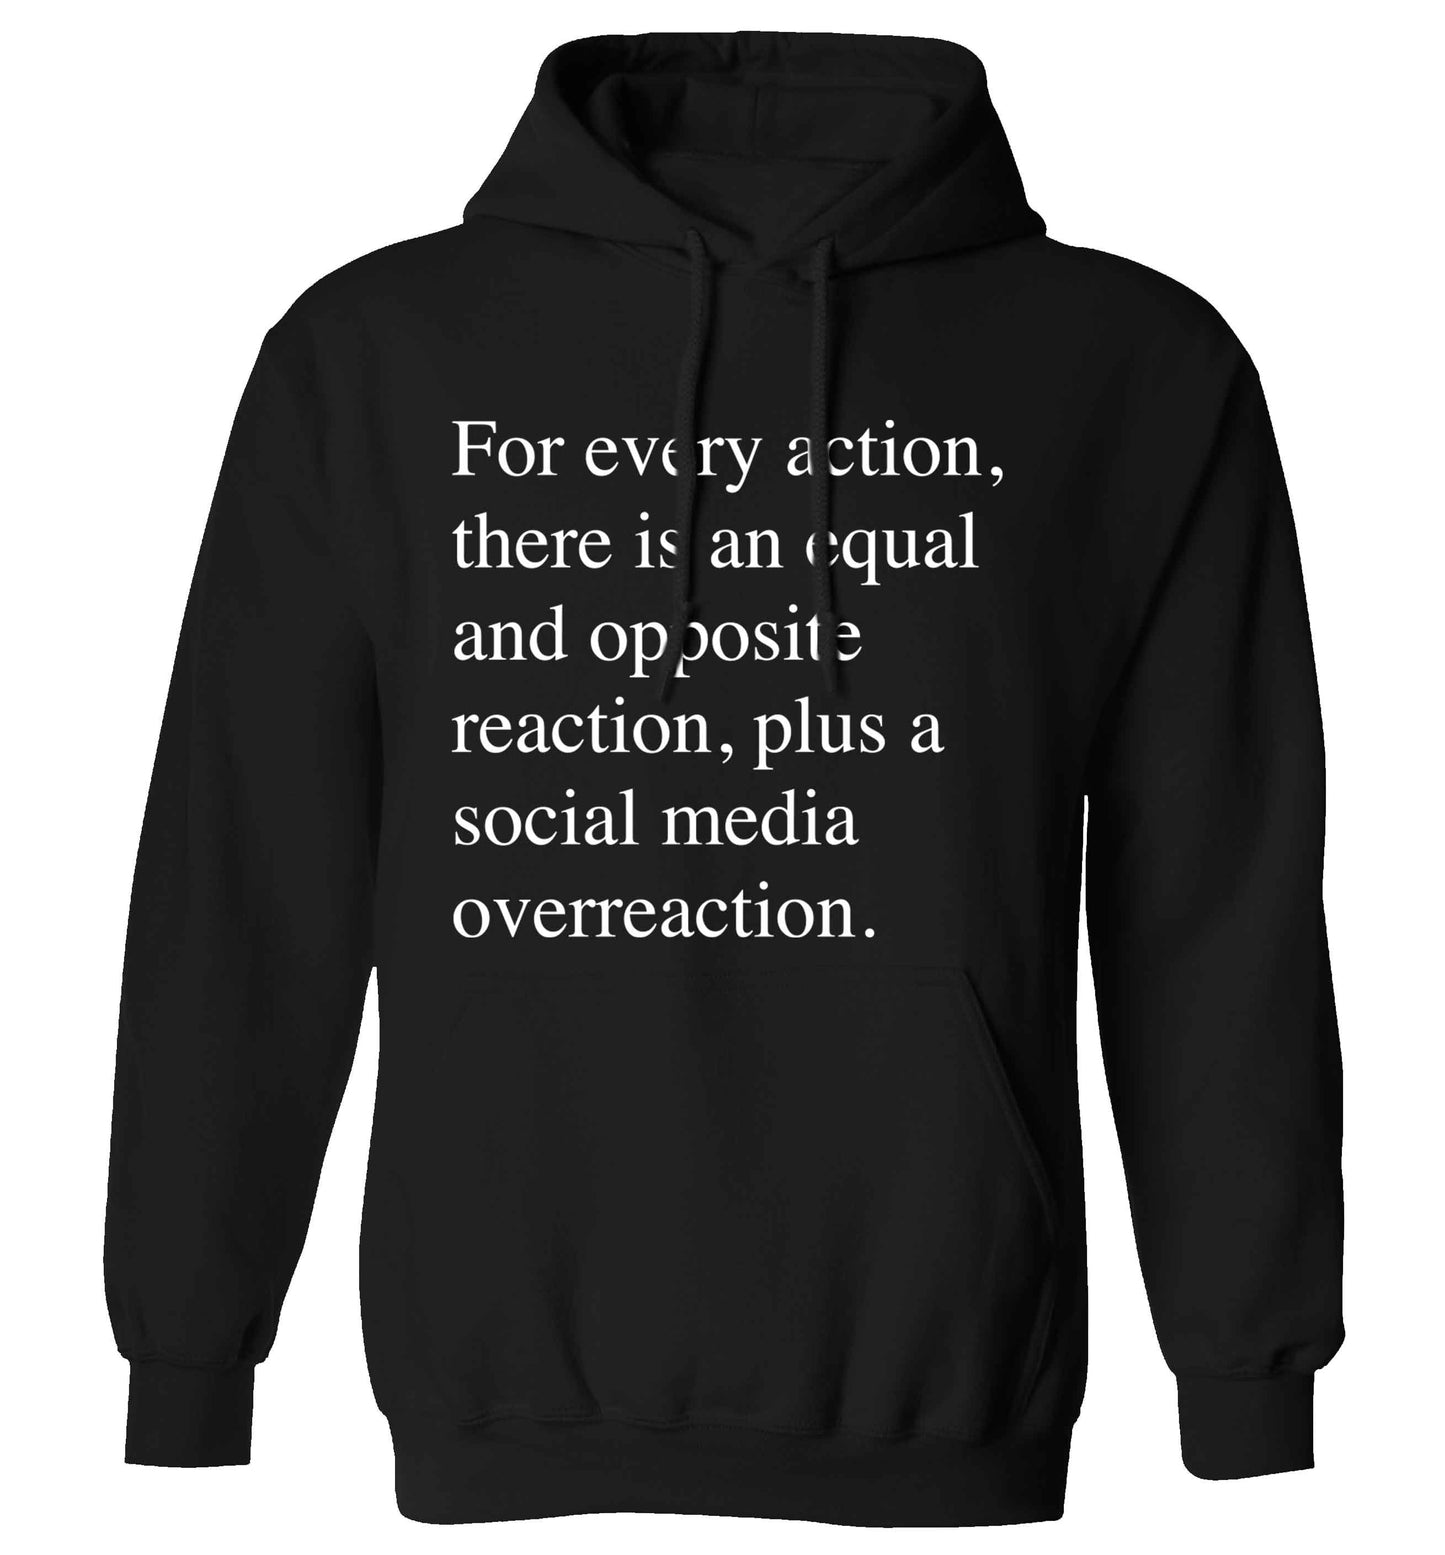 For every action...social media overreaction adults unisex black hoodie 2XL